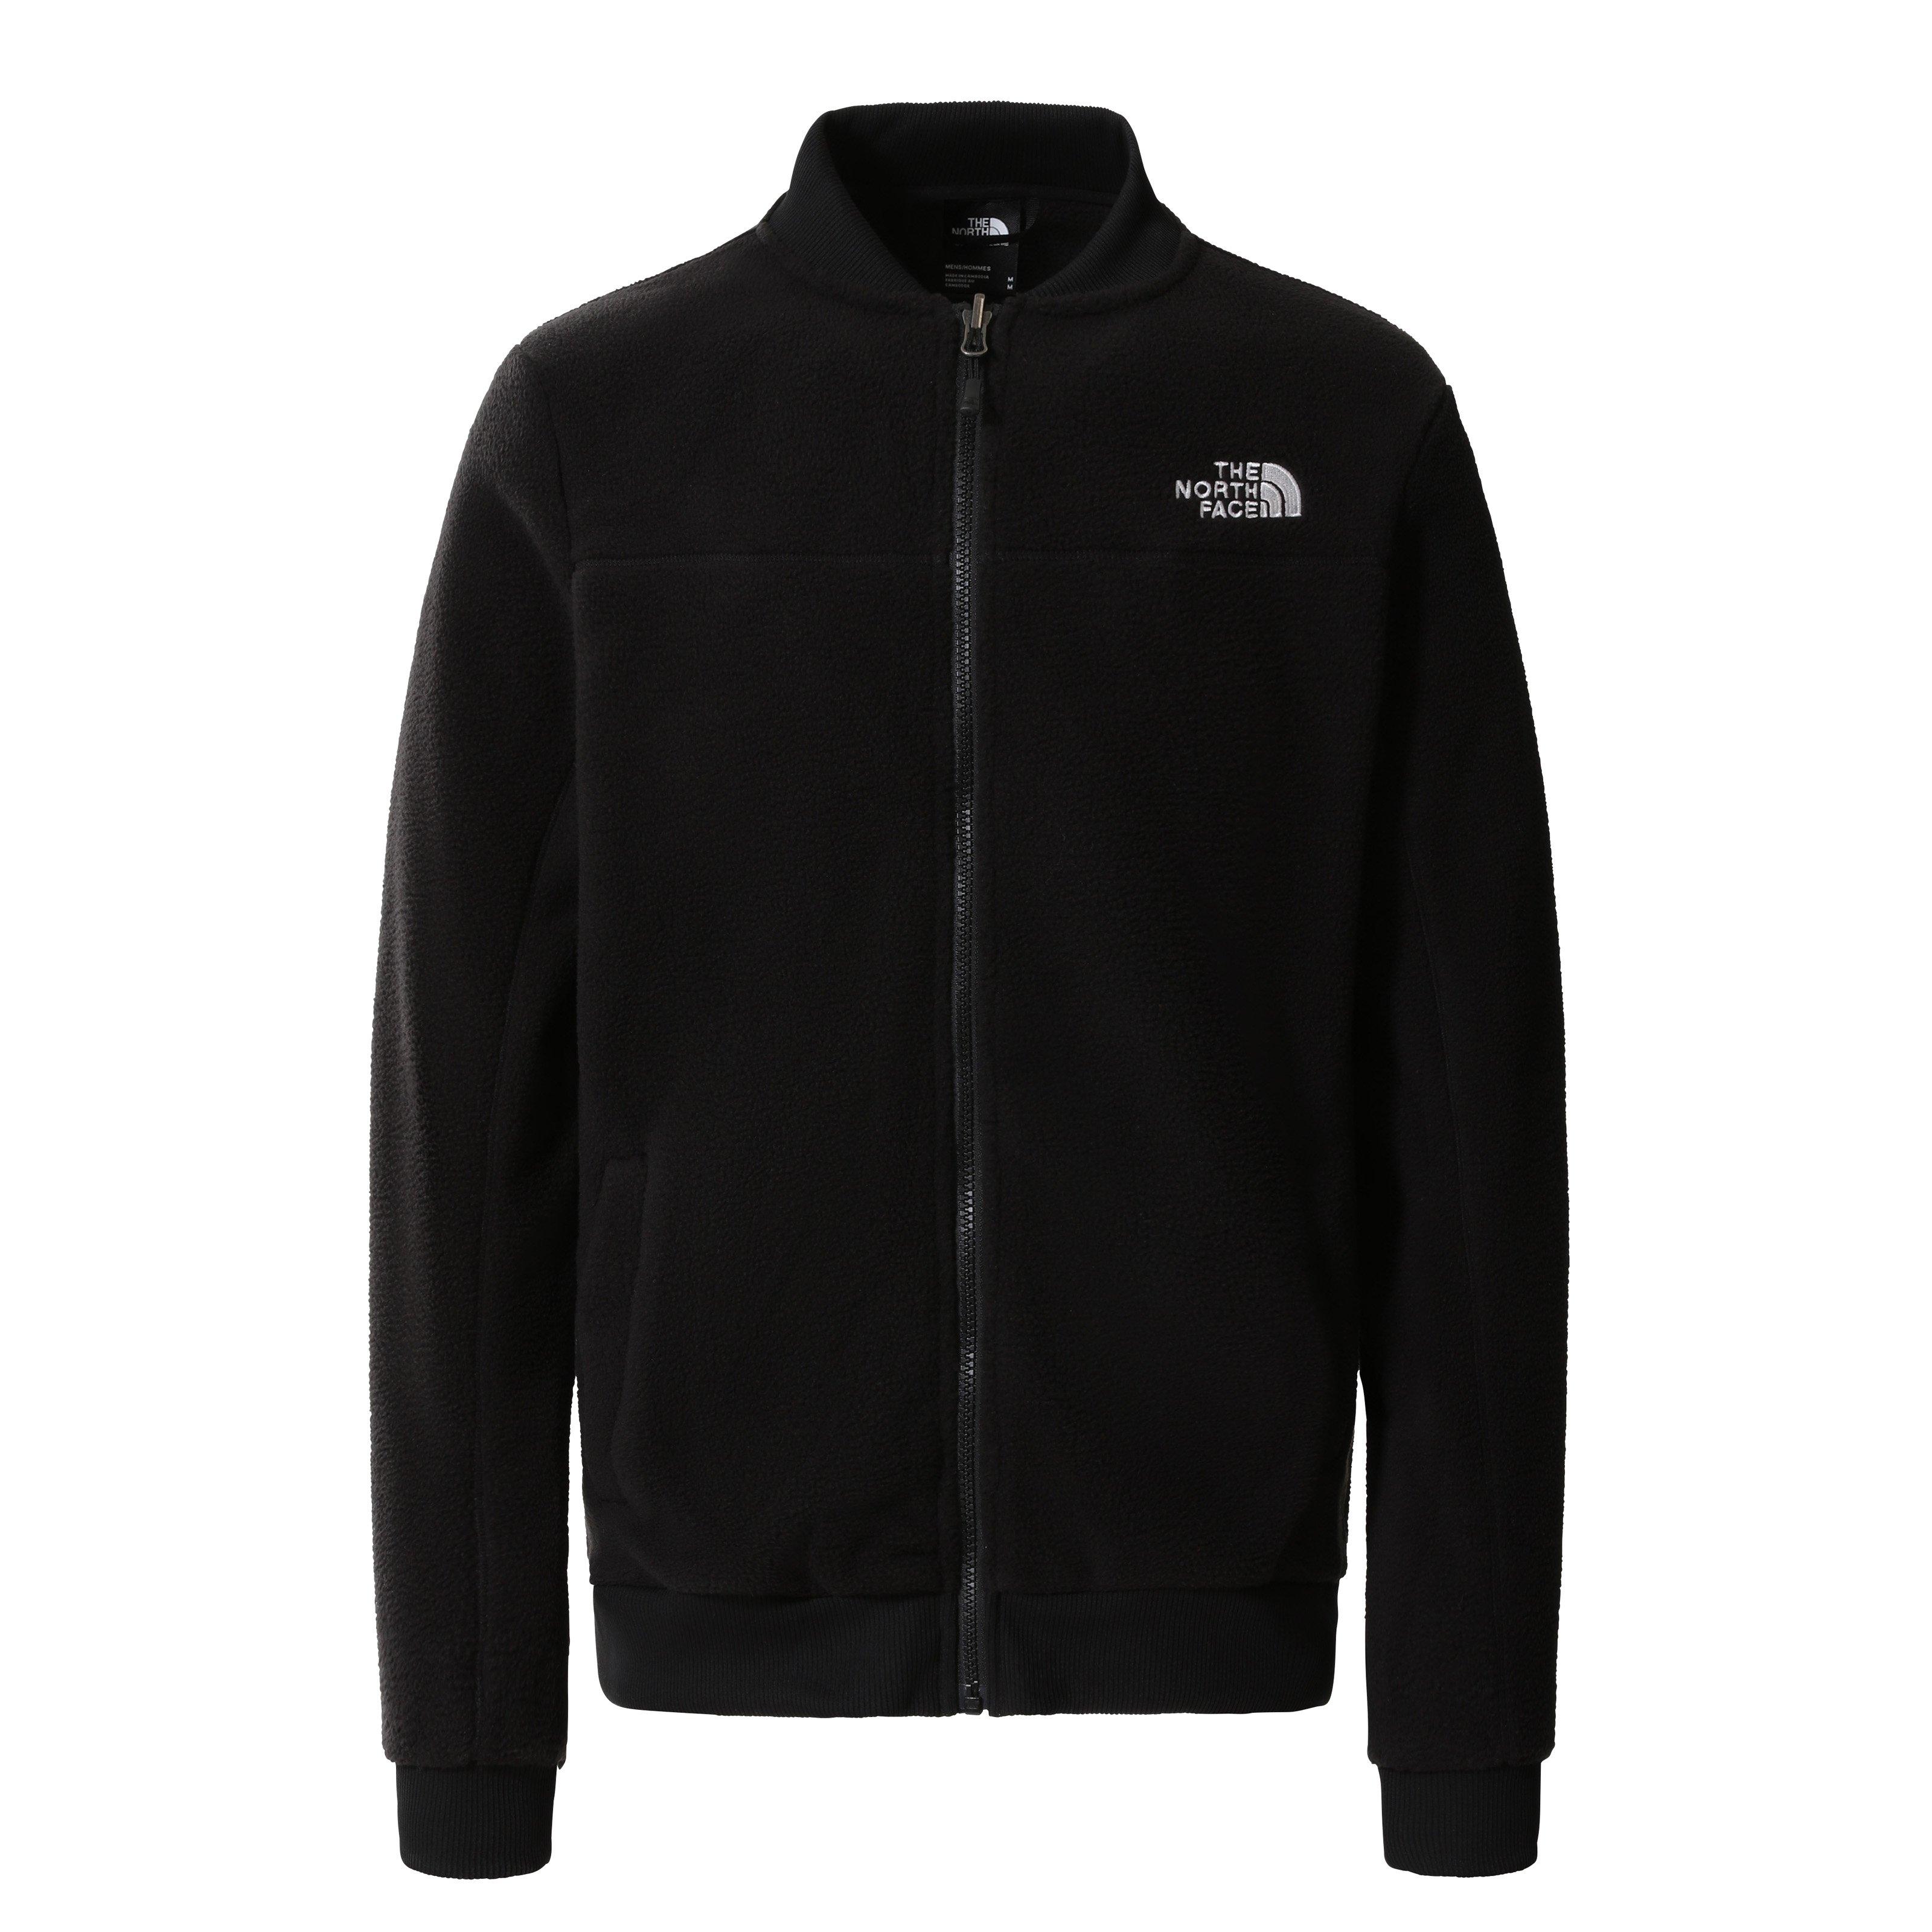 The North Face Men's Pinecroft Triclimate Jacket - Black | Tiso